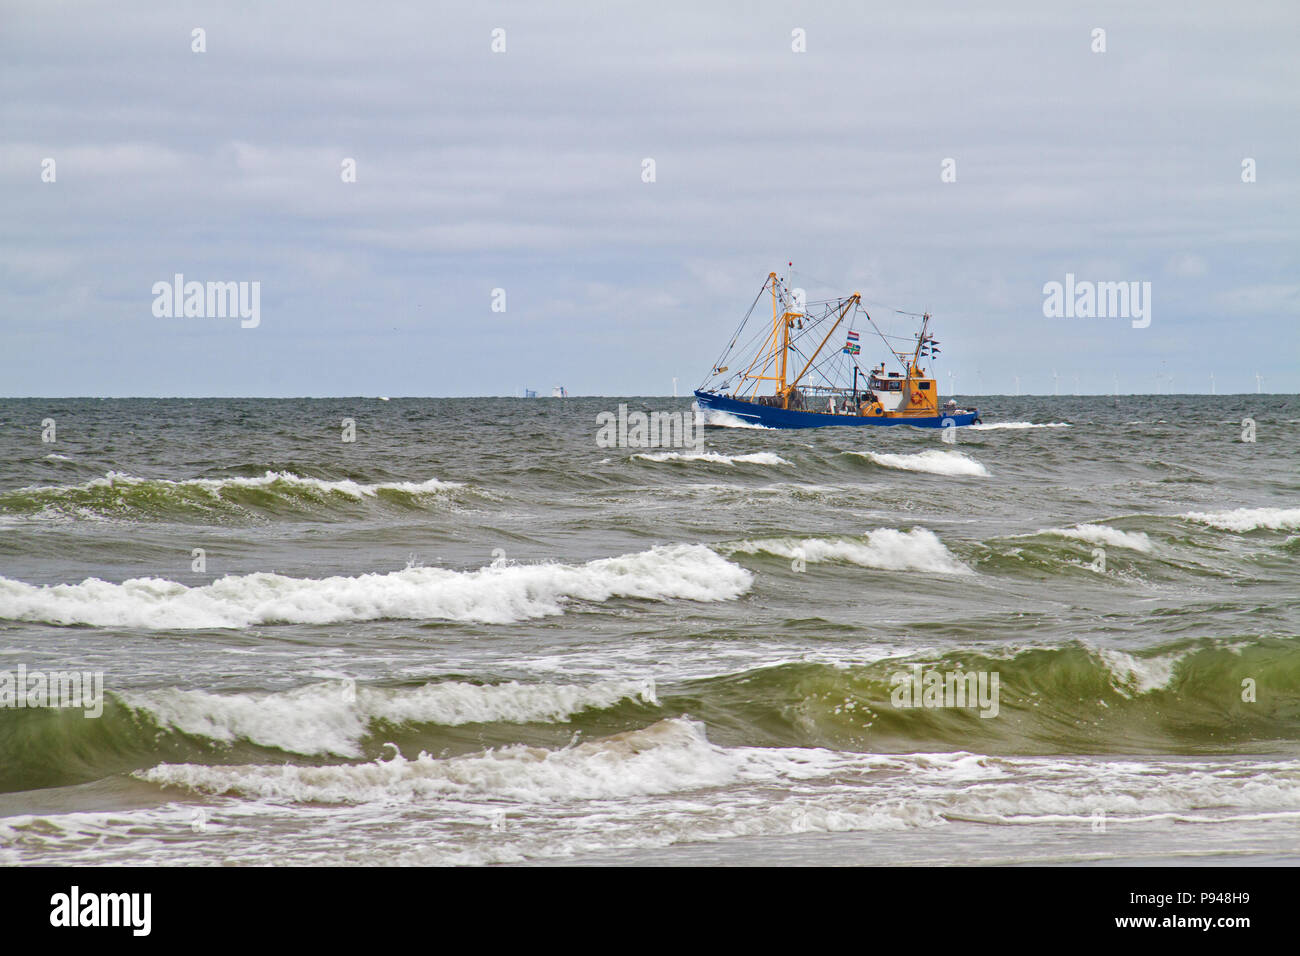 Blue fishing cutter sailing close to the coast, breakers in the foreground Stock Photo